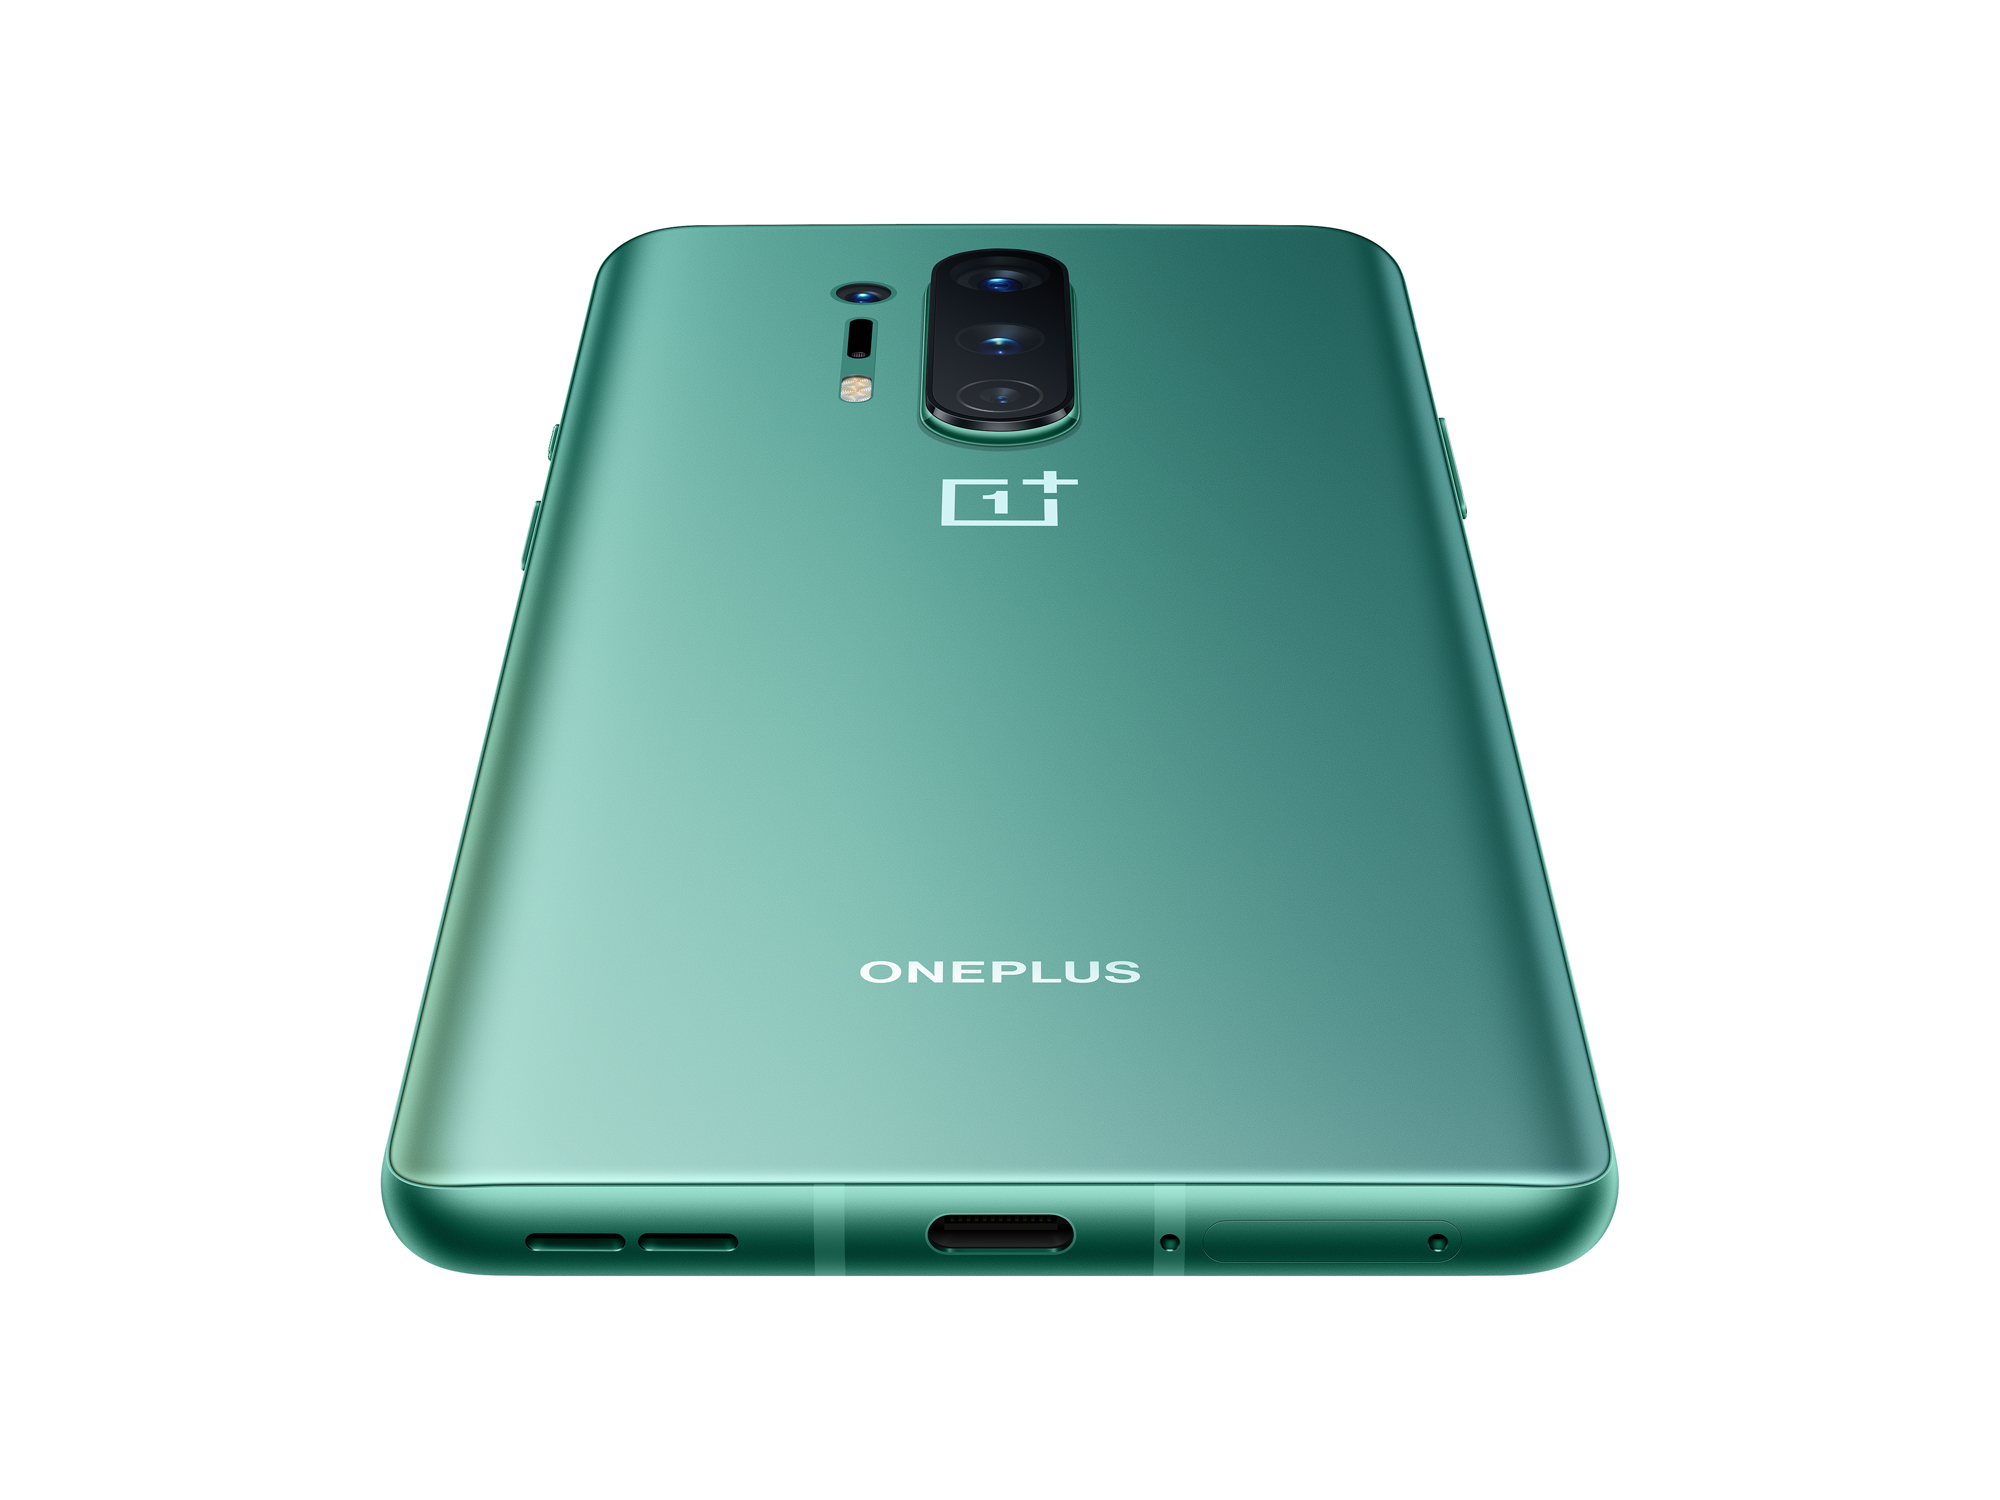 Egoísmo Molesto los OnePlus 8 Pro Smartphone Review: Now also charges wirelessly -  NotebookCheck.net Reviews